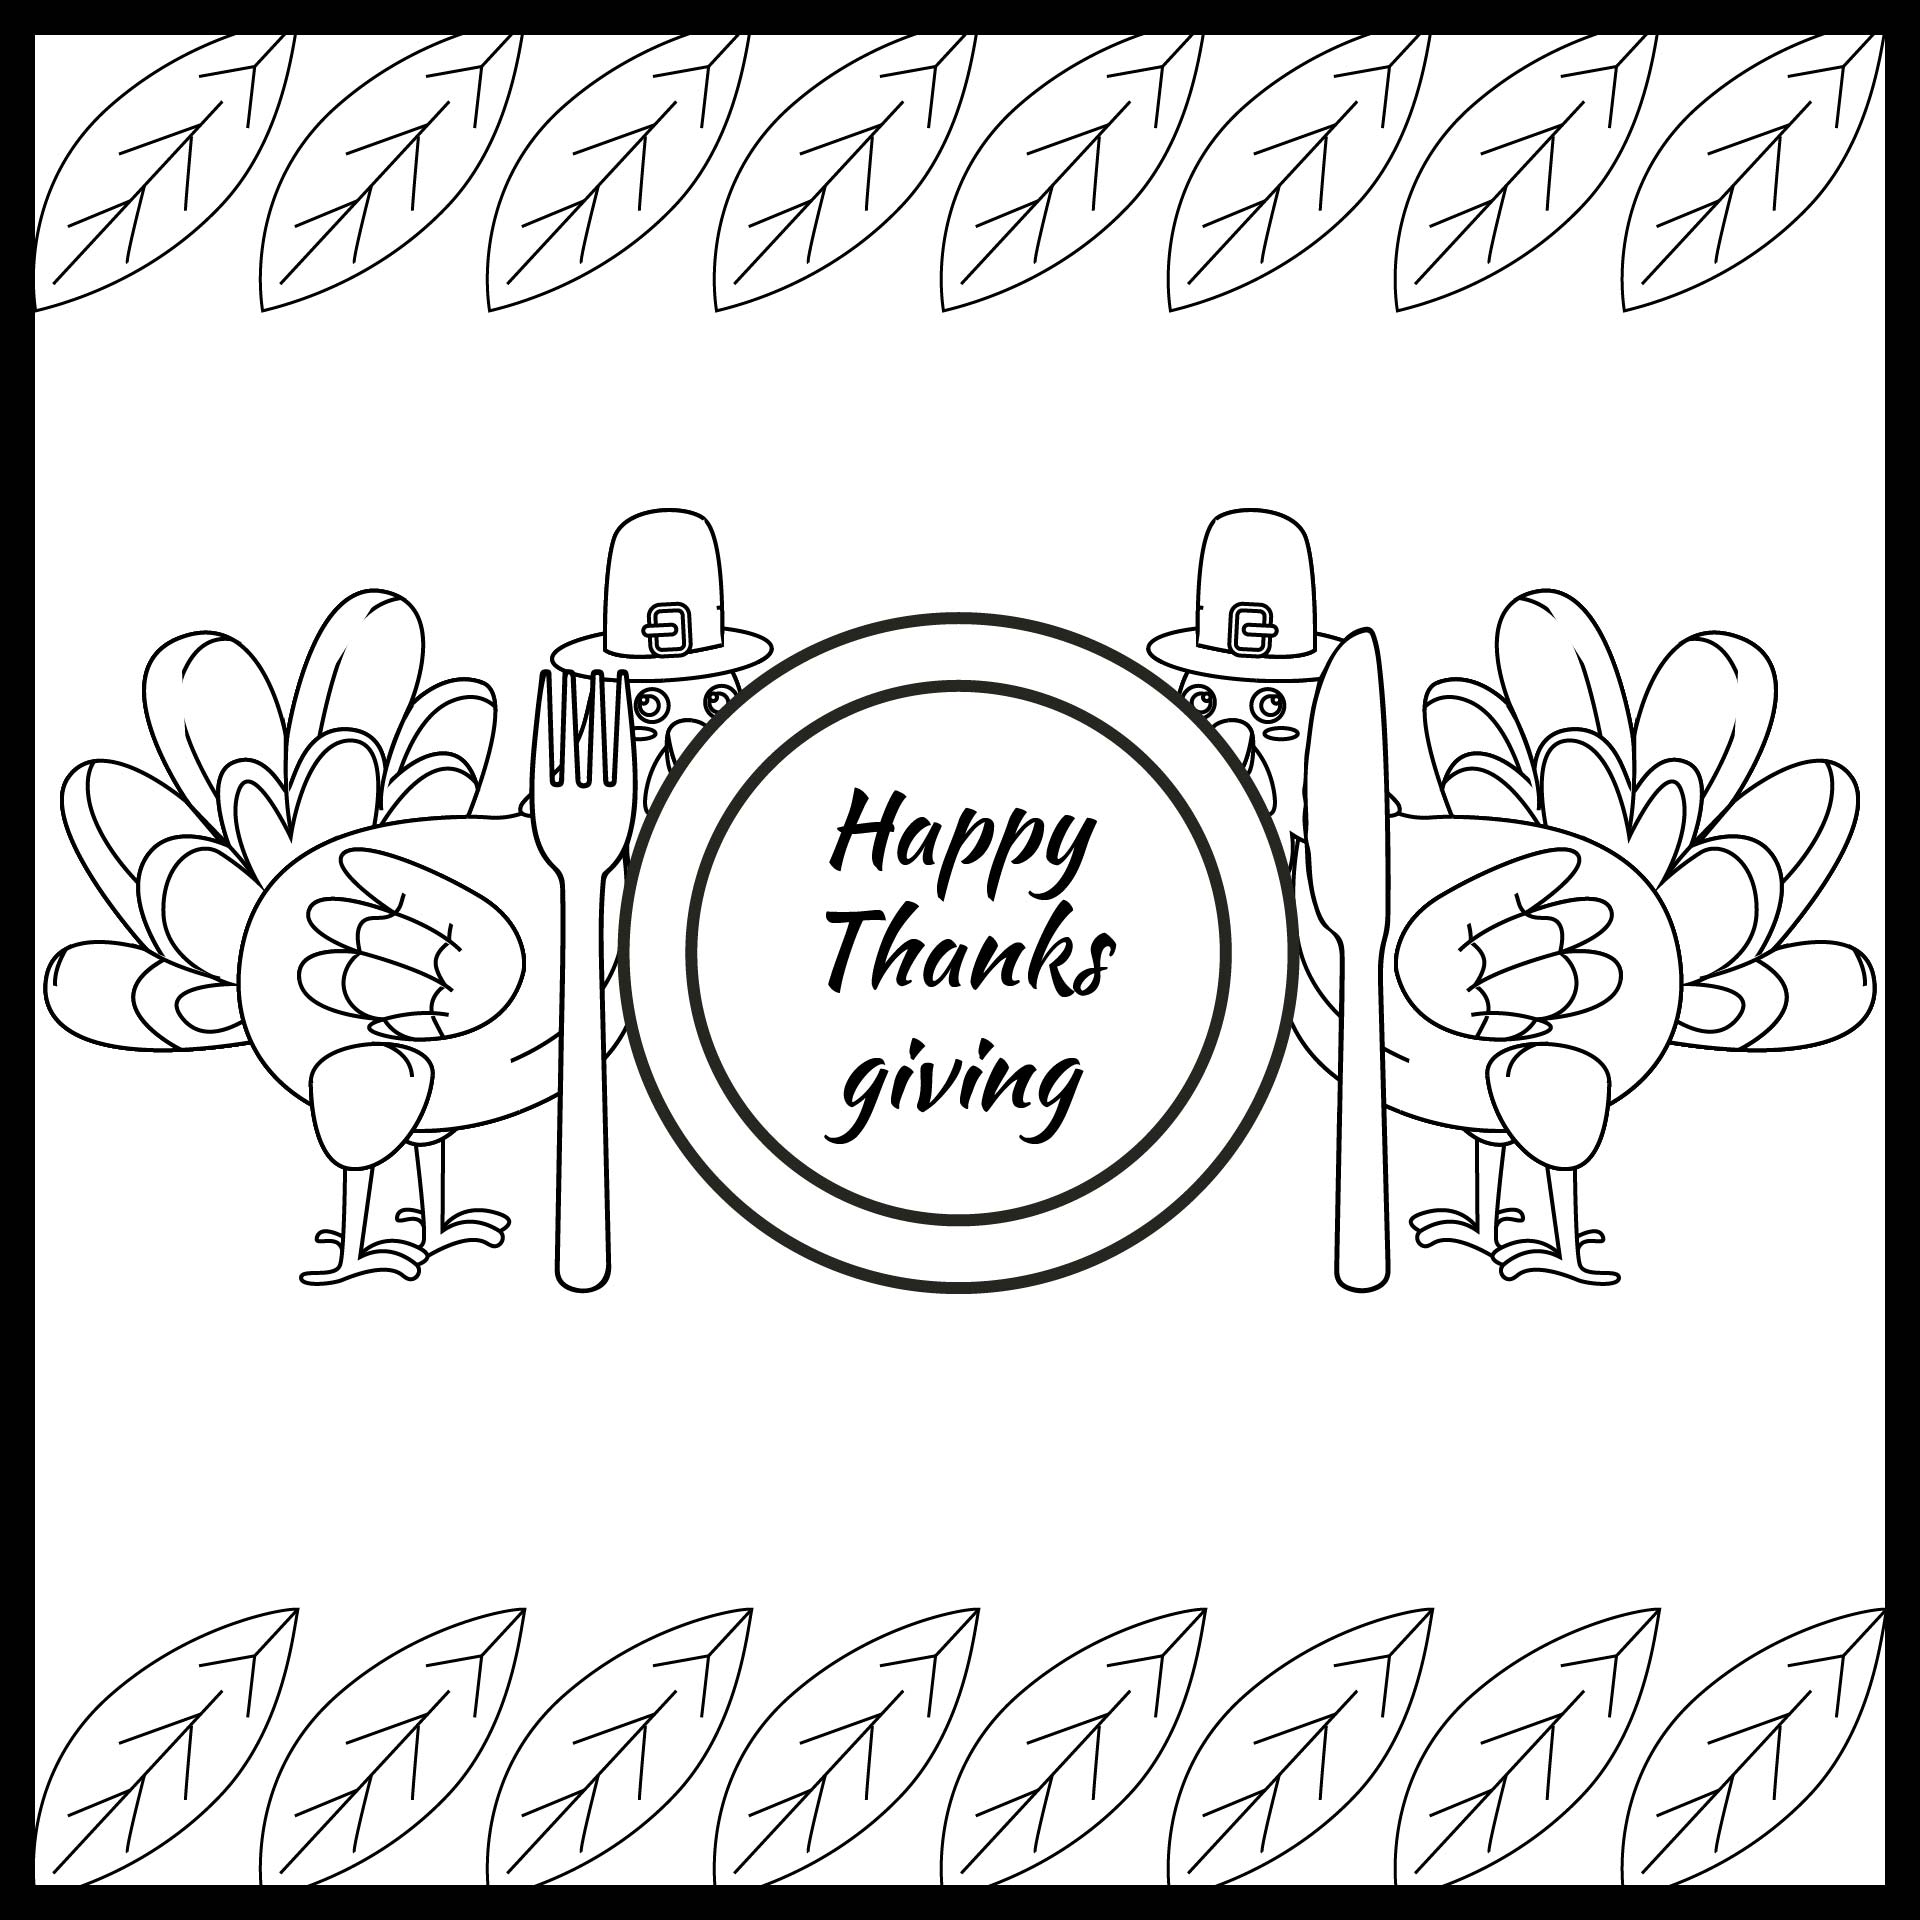 Thanksgiving Plate Coloring Page